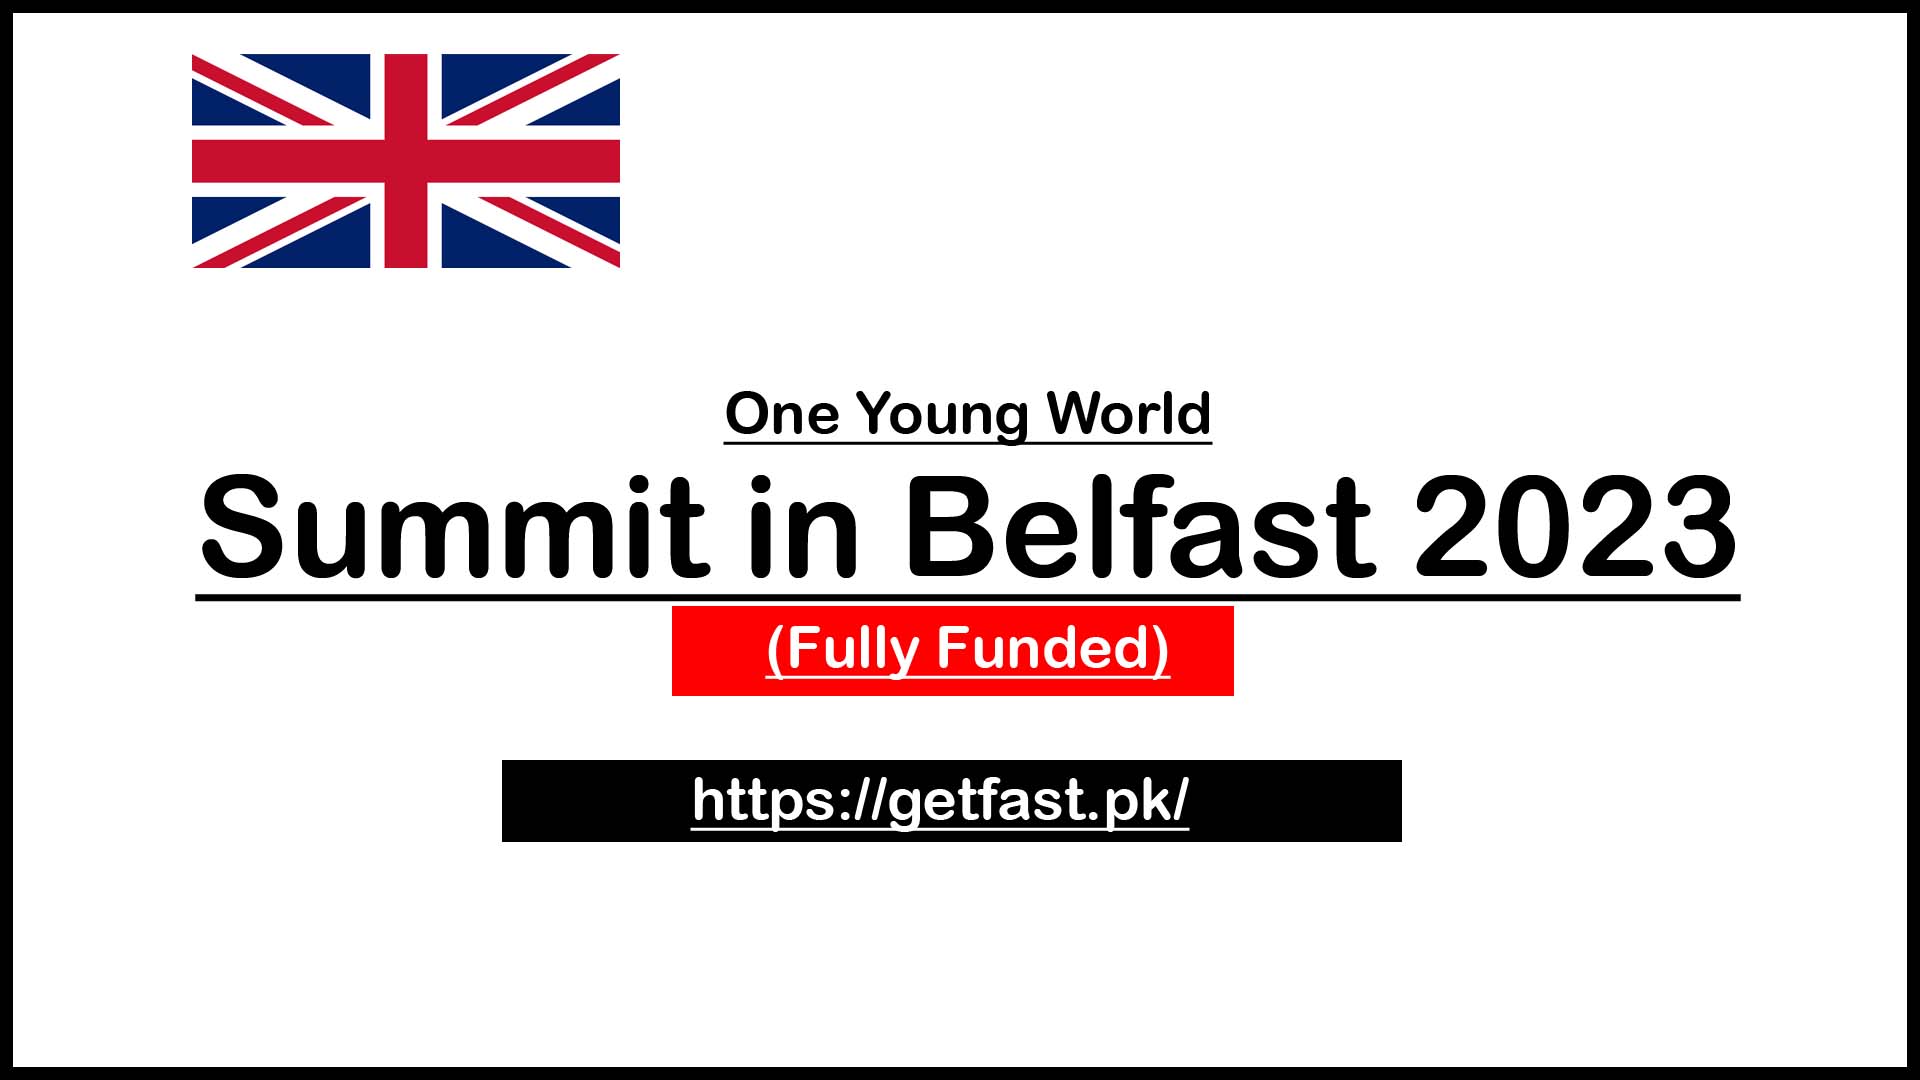 One Young World Summit in Belfast 2023 (Fully Funded)